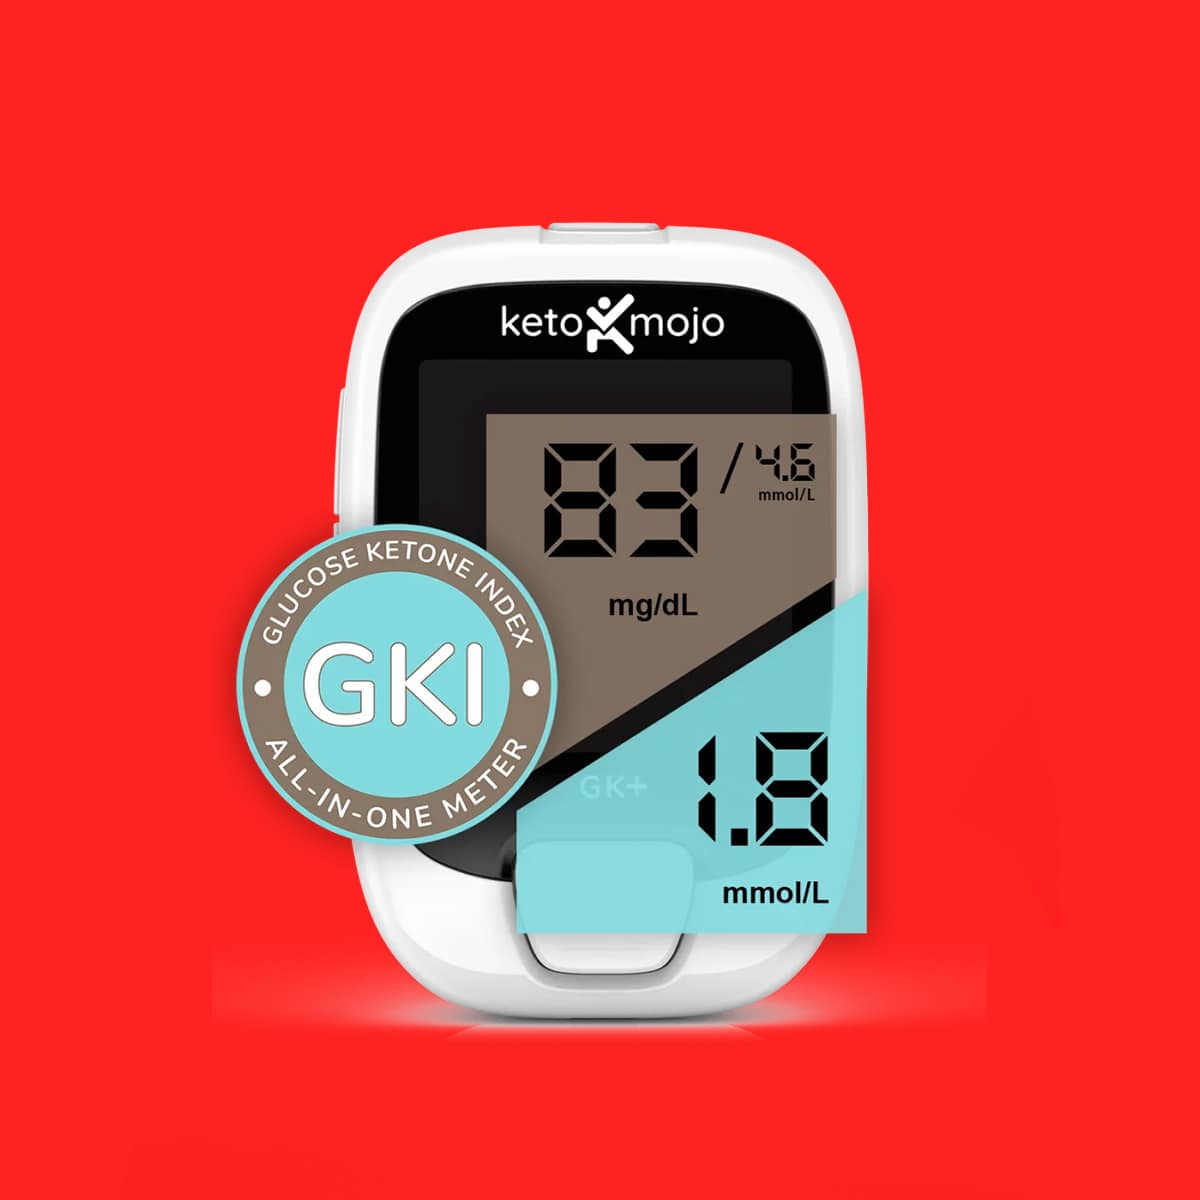 Image of a ketone meter on a red background.